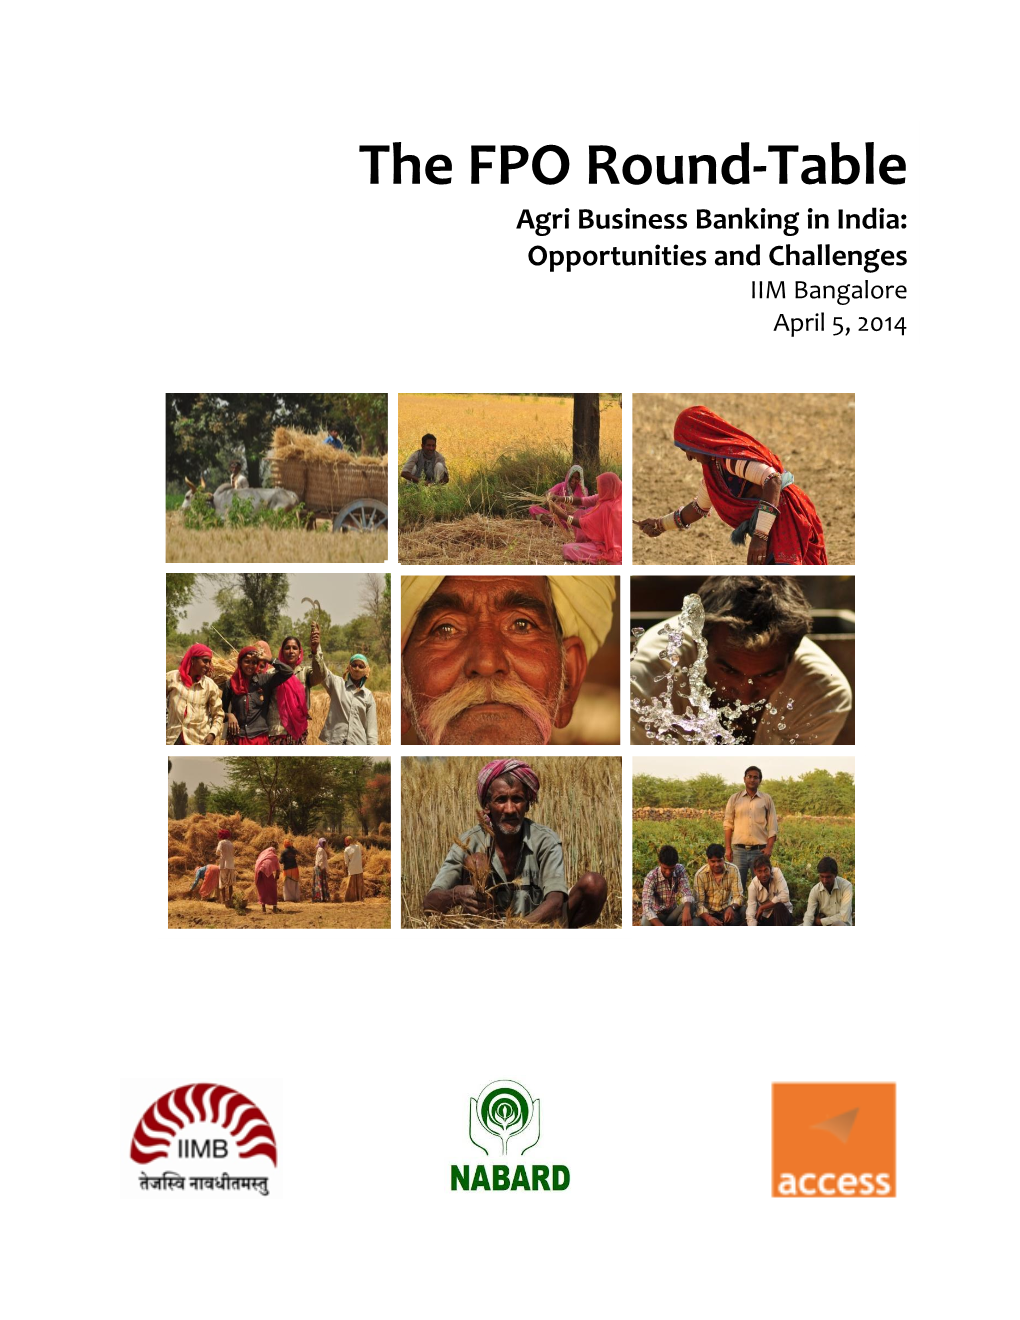 The FPO Round-Table Agri Business Banking in India: Opportunities and Challenges IIM Bangalore April 5, 2014 CONTENTS